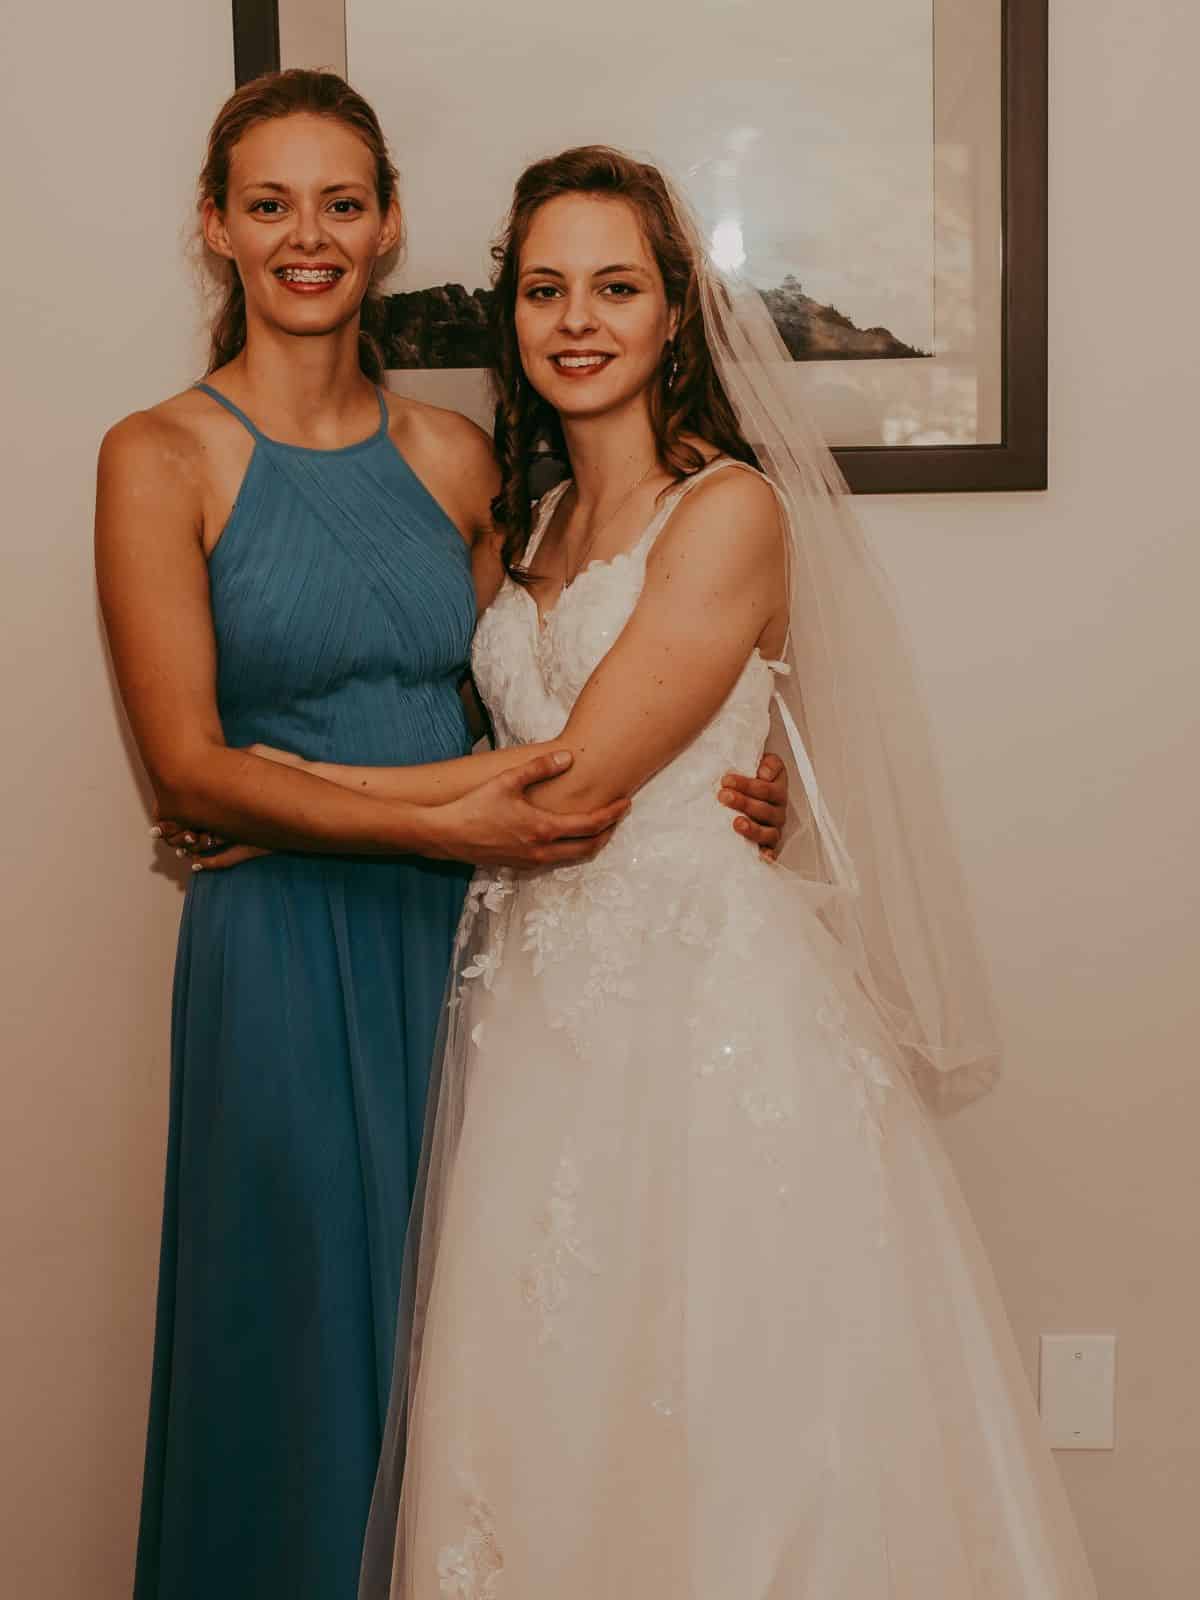 Two girls standing together. One is wearing a wedding dress the other a blue bridesmaid dress.